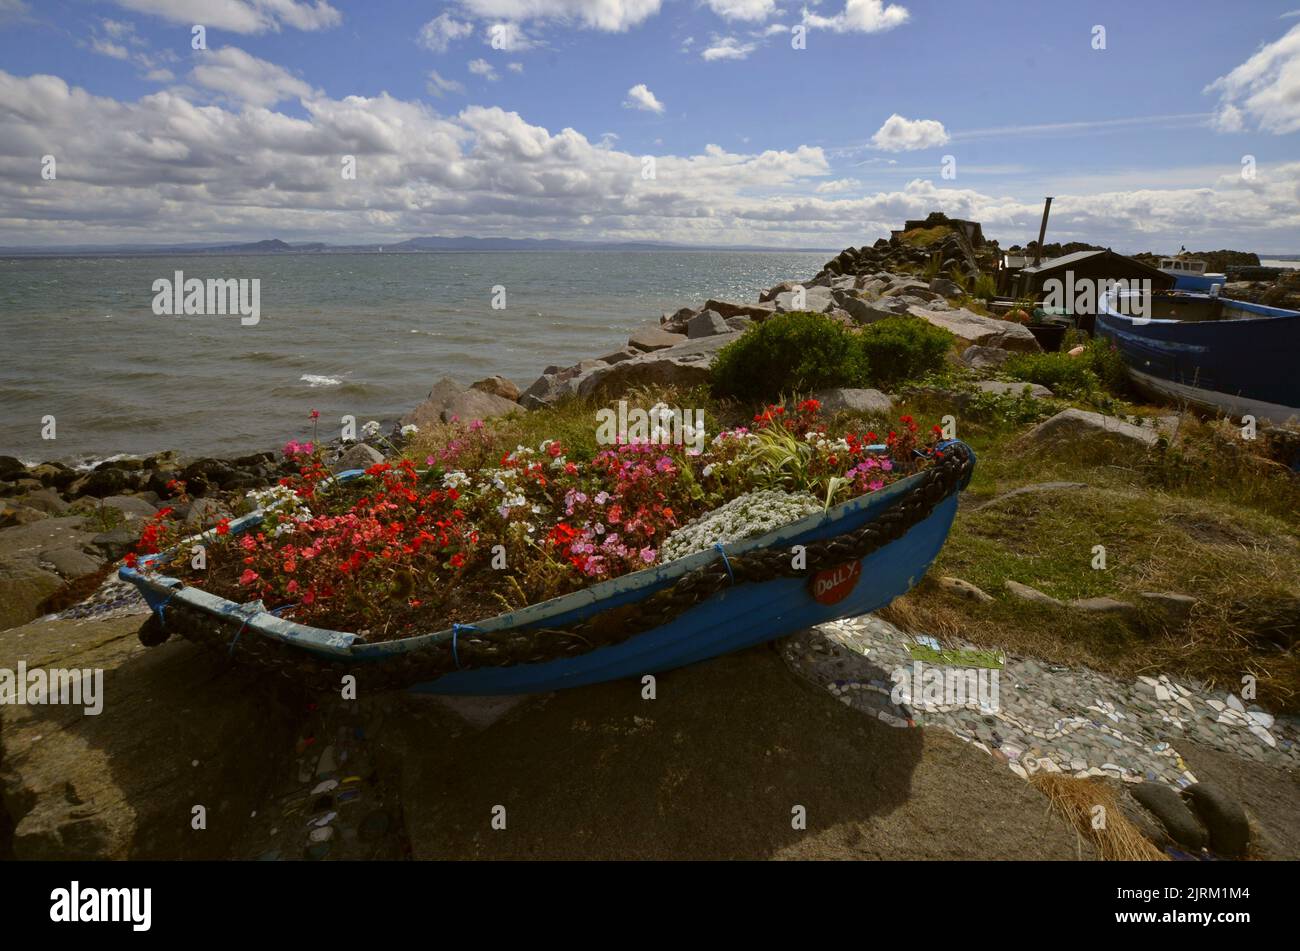 An old boat recycled as a giant flower pot in the harbour area of Kinghorn, Fife, Scotland, UK - Photo: Geopix Stock Photo